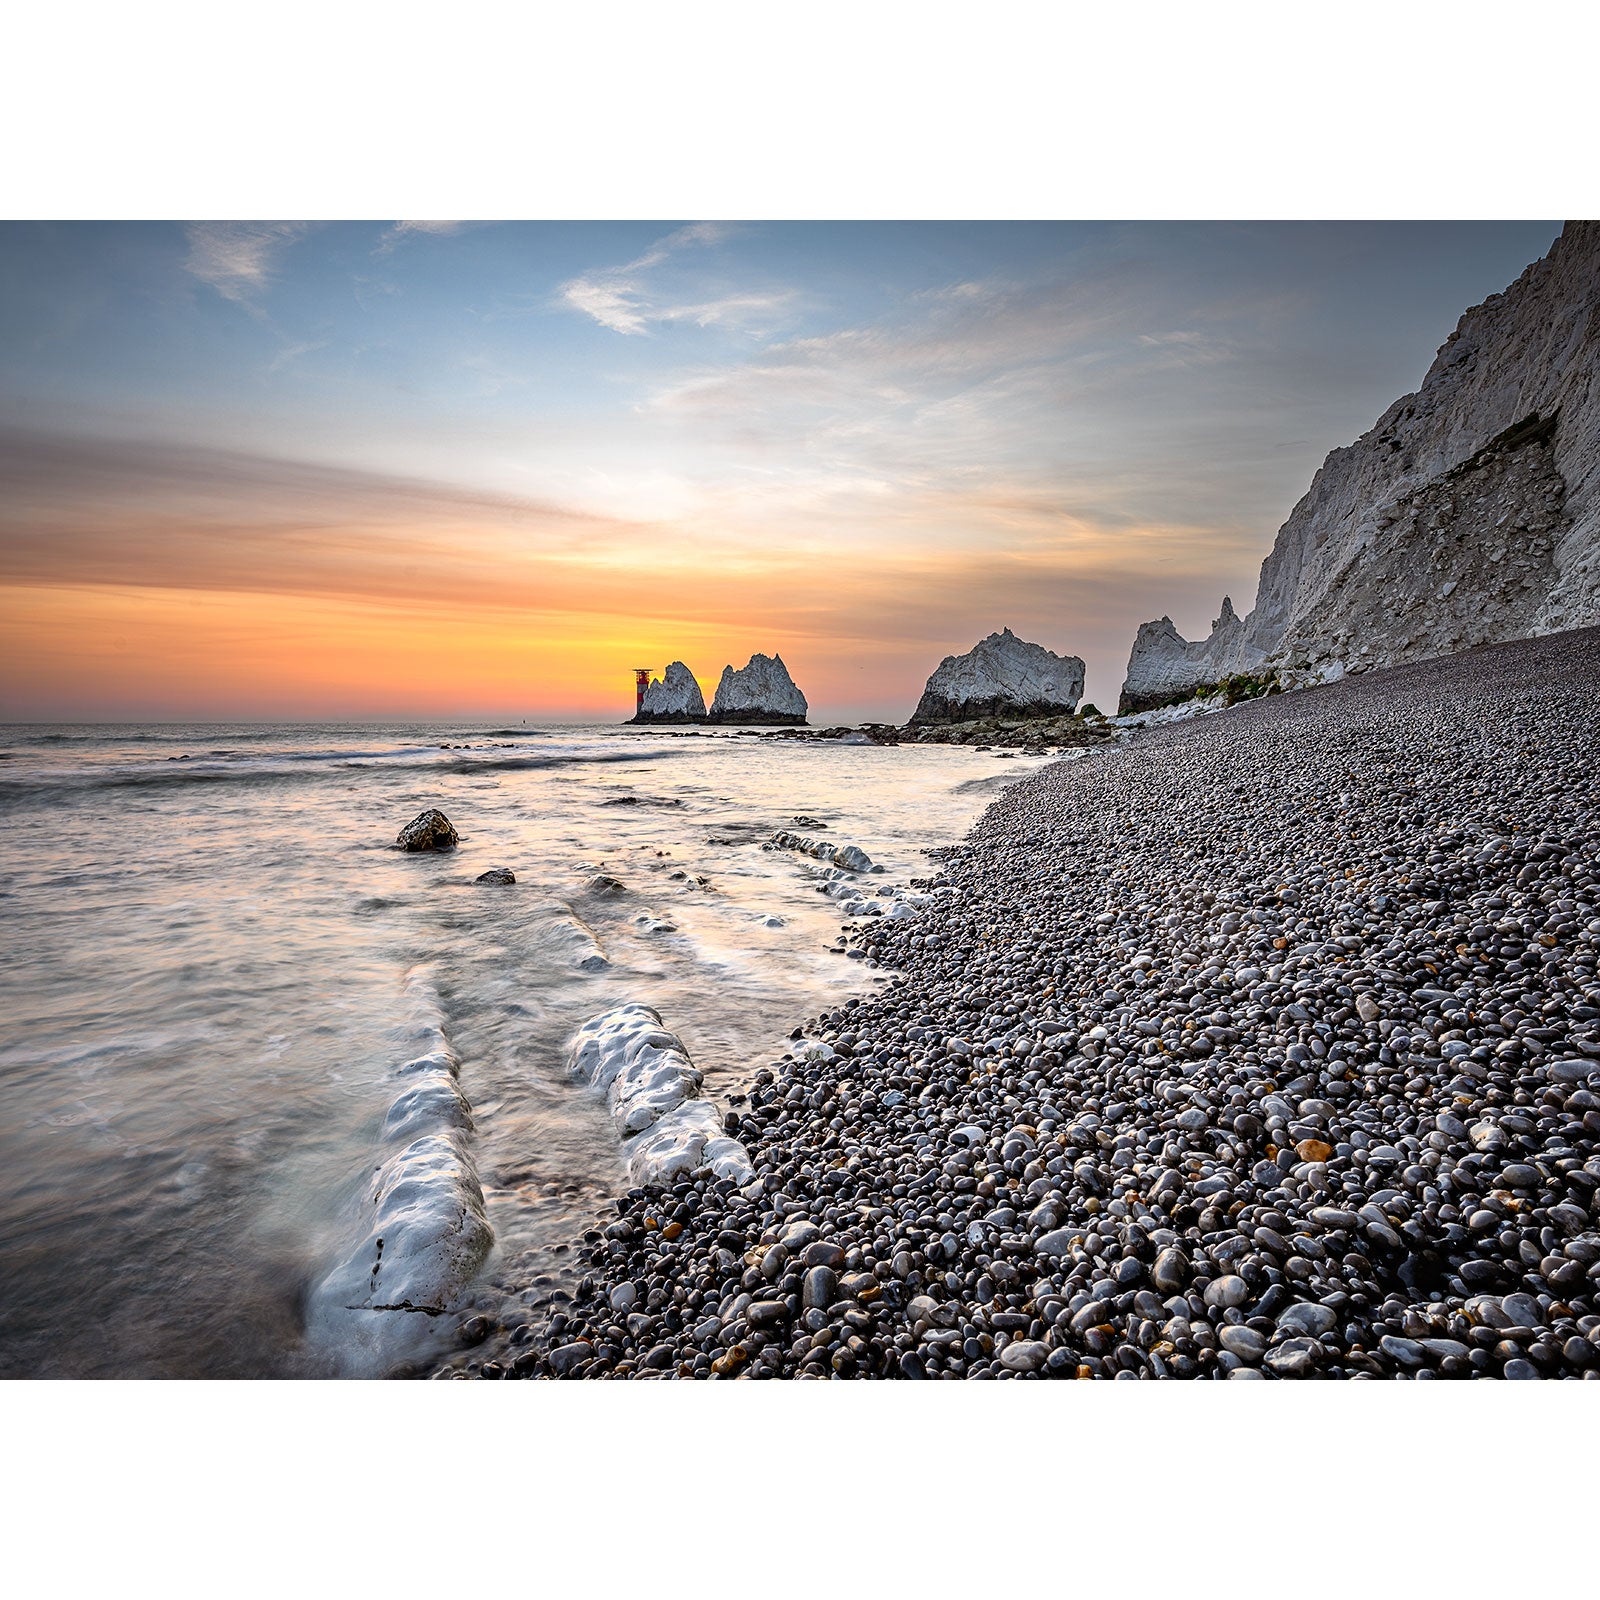 Pebble beach at sunset with cliffs and rock formations in the background, reminiscent of The Needles natural beauty by Available Light Photography.